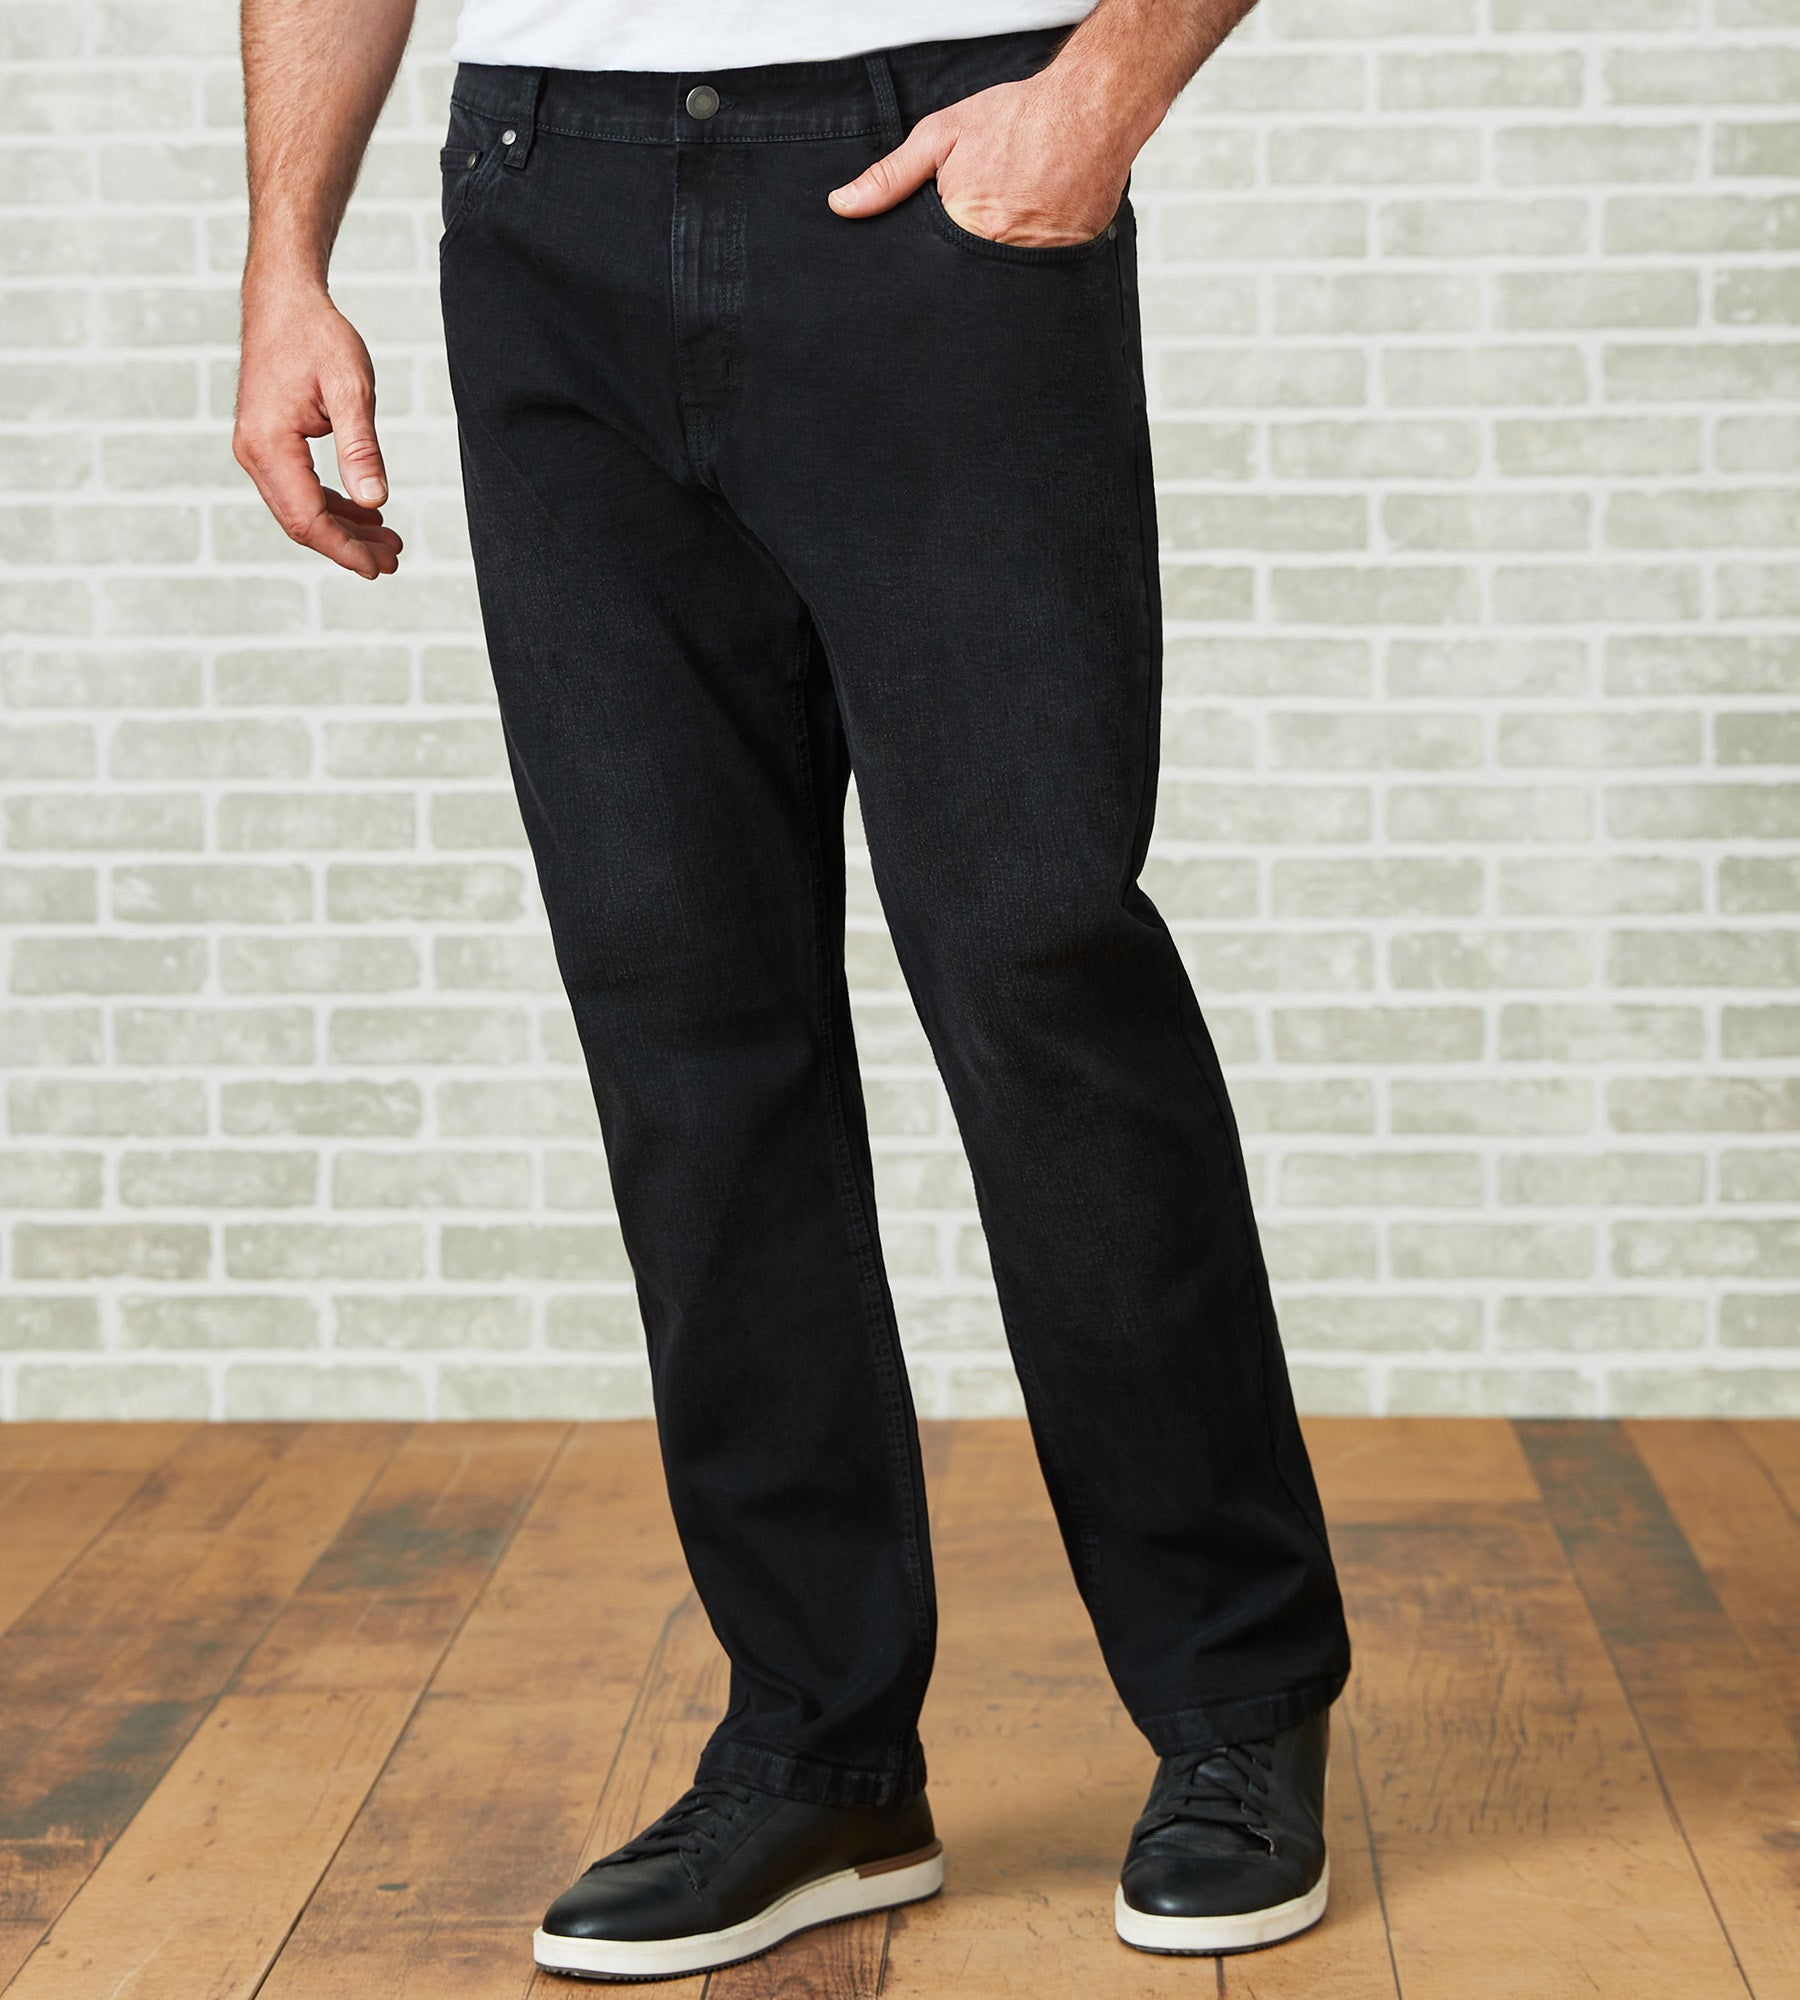 Relaxed Fit Jeans – Mr. Big & Tall